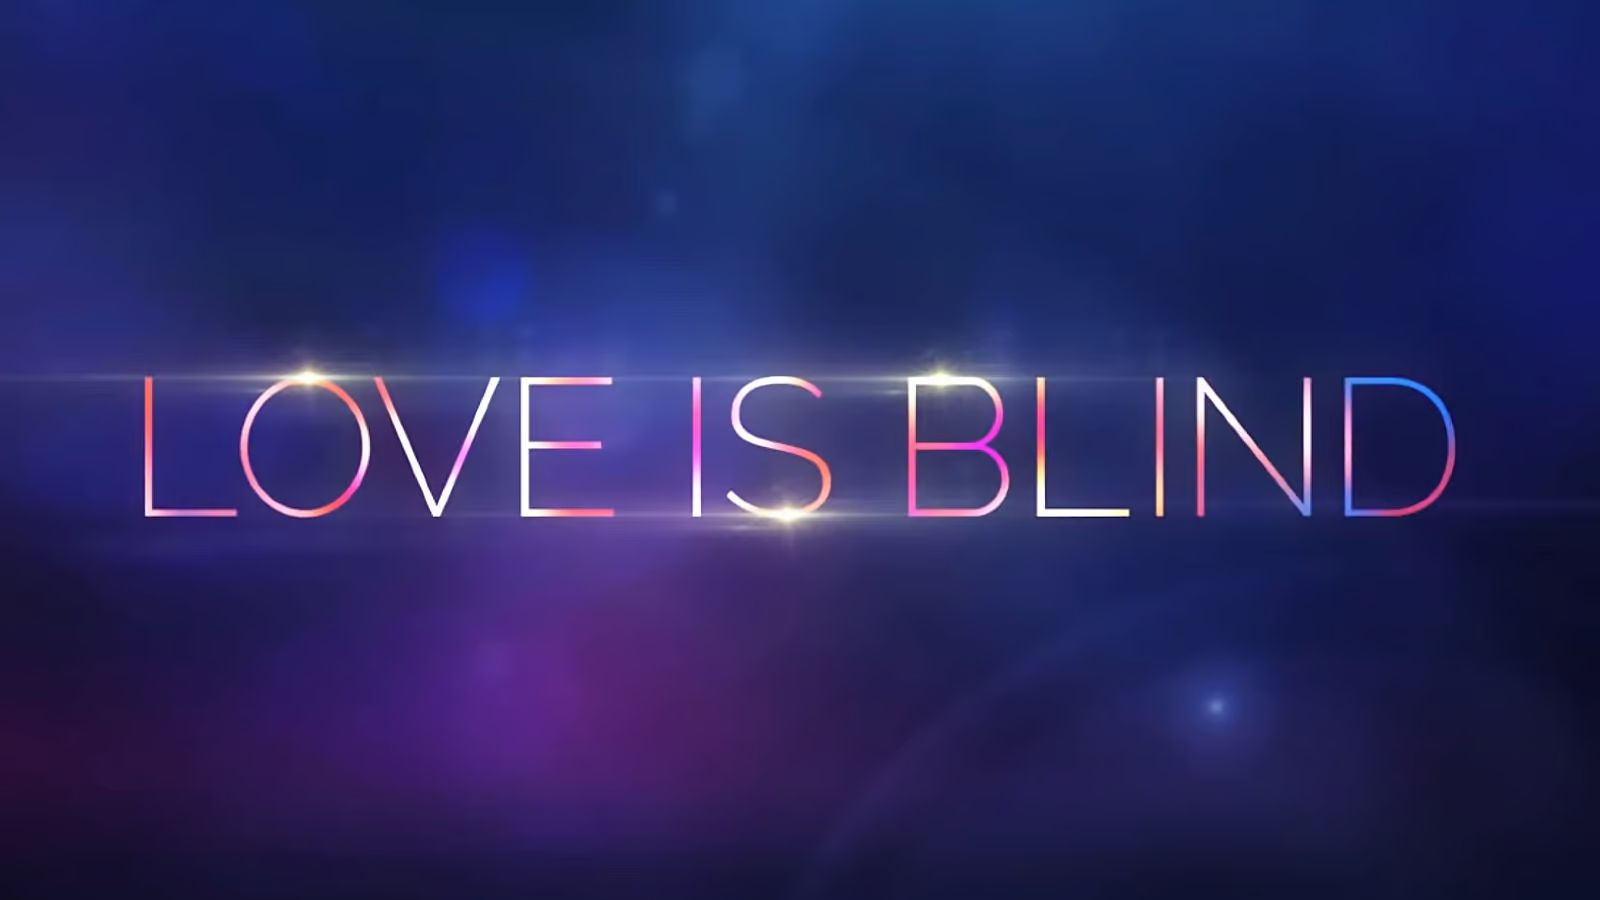 ‘Love Is Blind’ Producers Face Lawsuit Over Alleged Sexual Assault Of Contestant